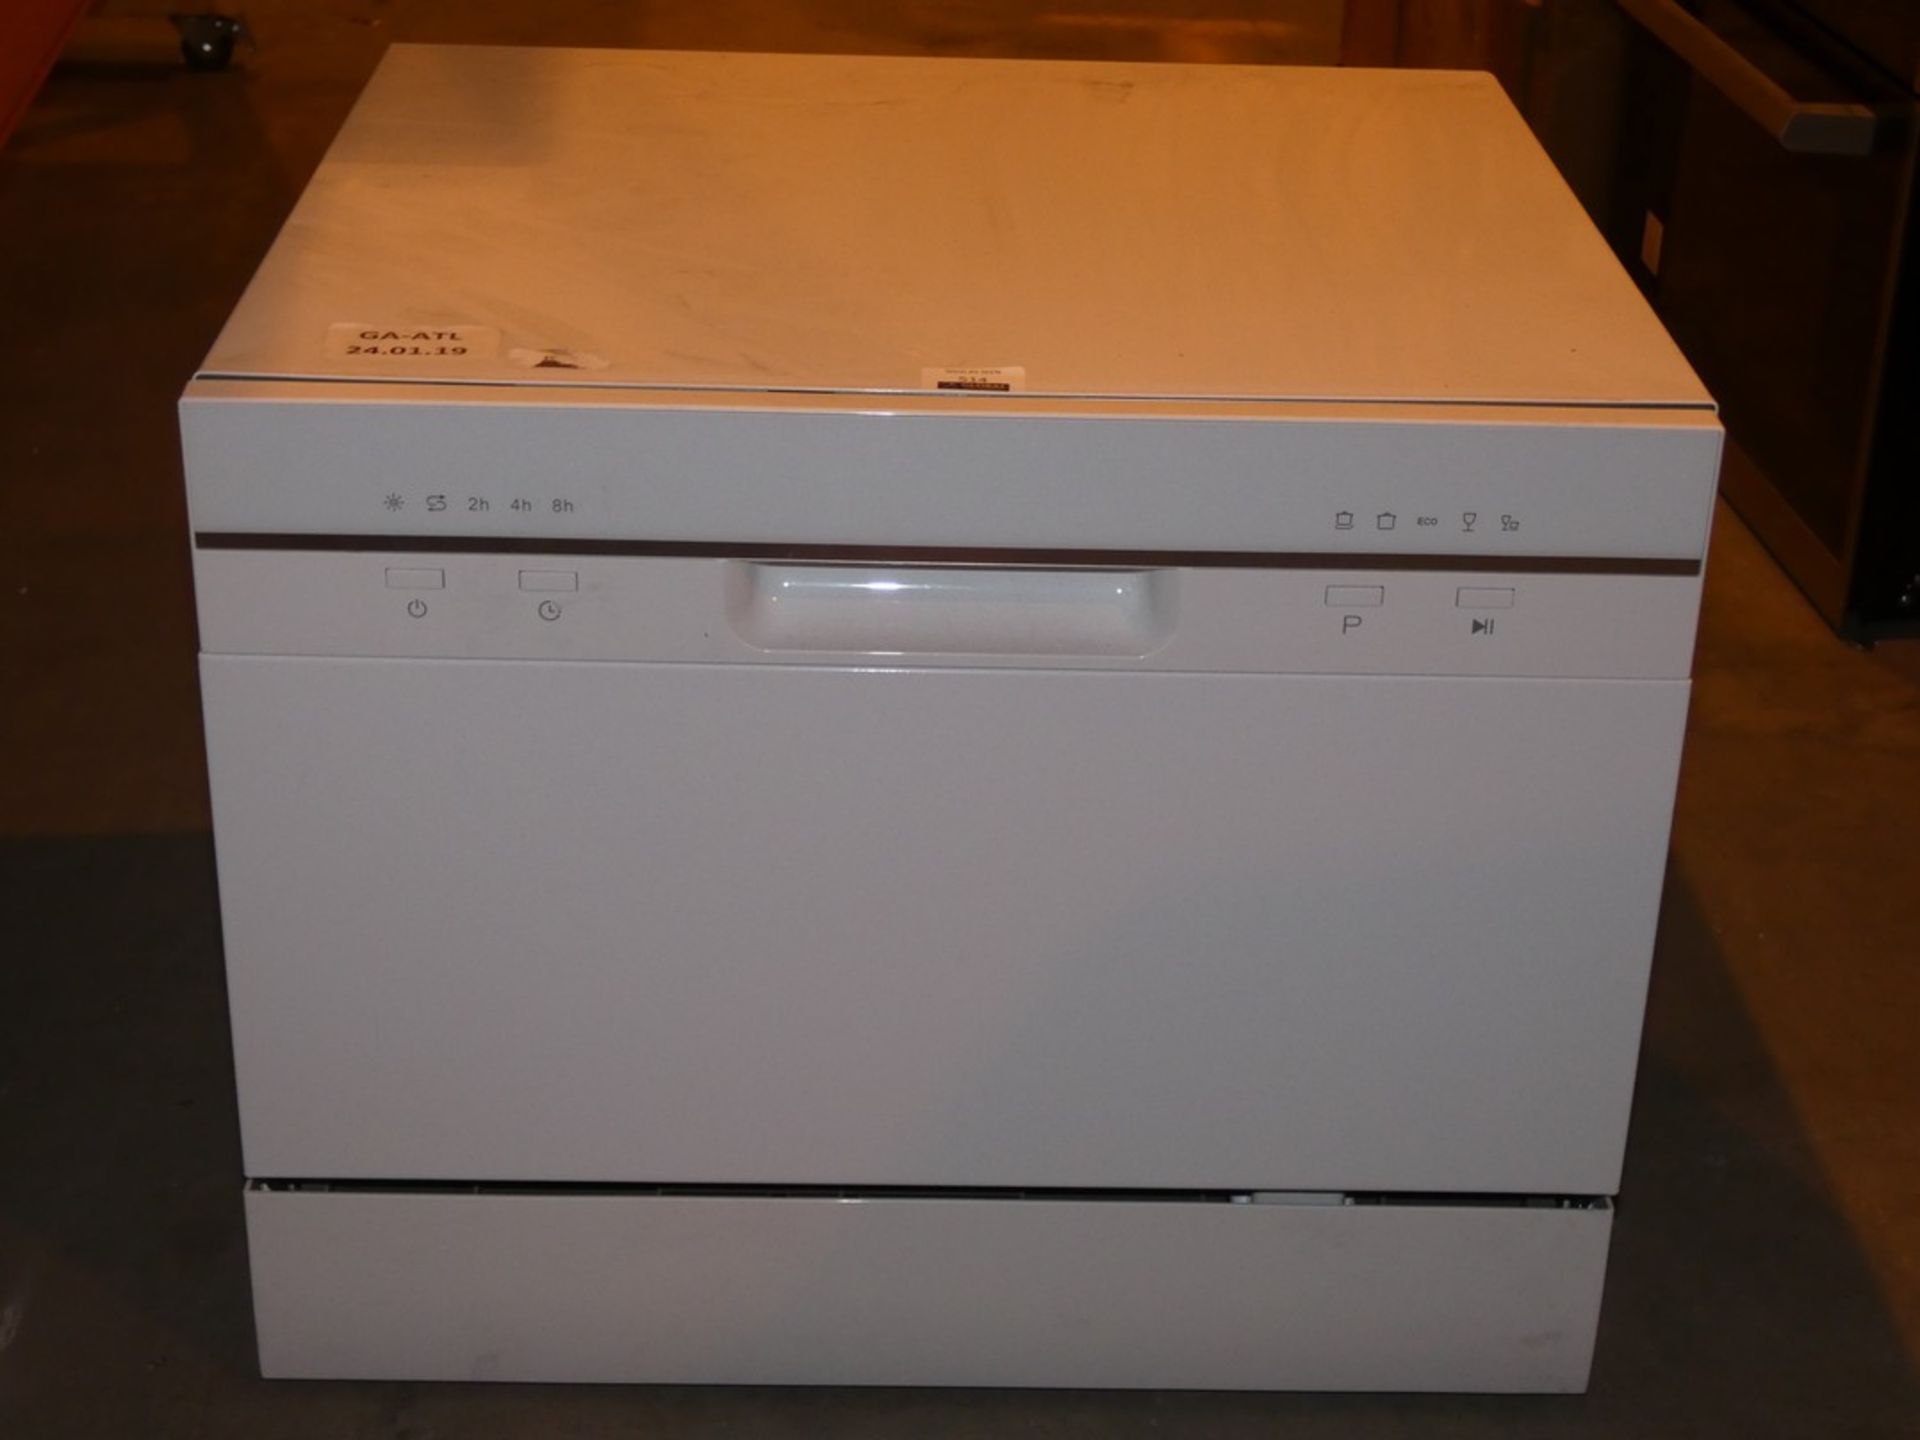 GBWDMTT Counter Top Dish Washer in White